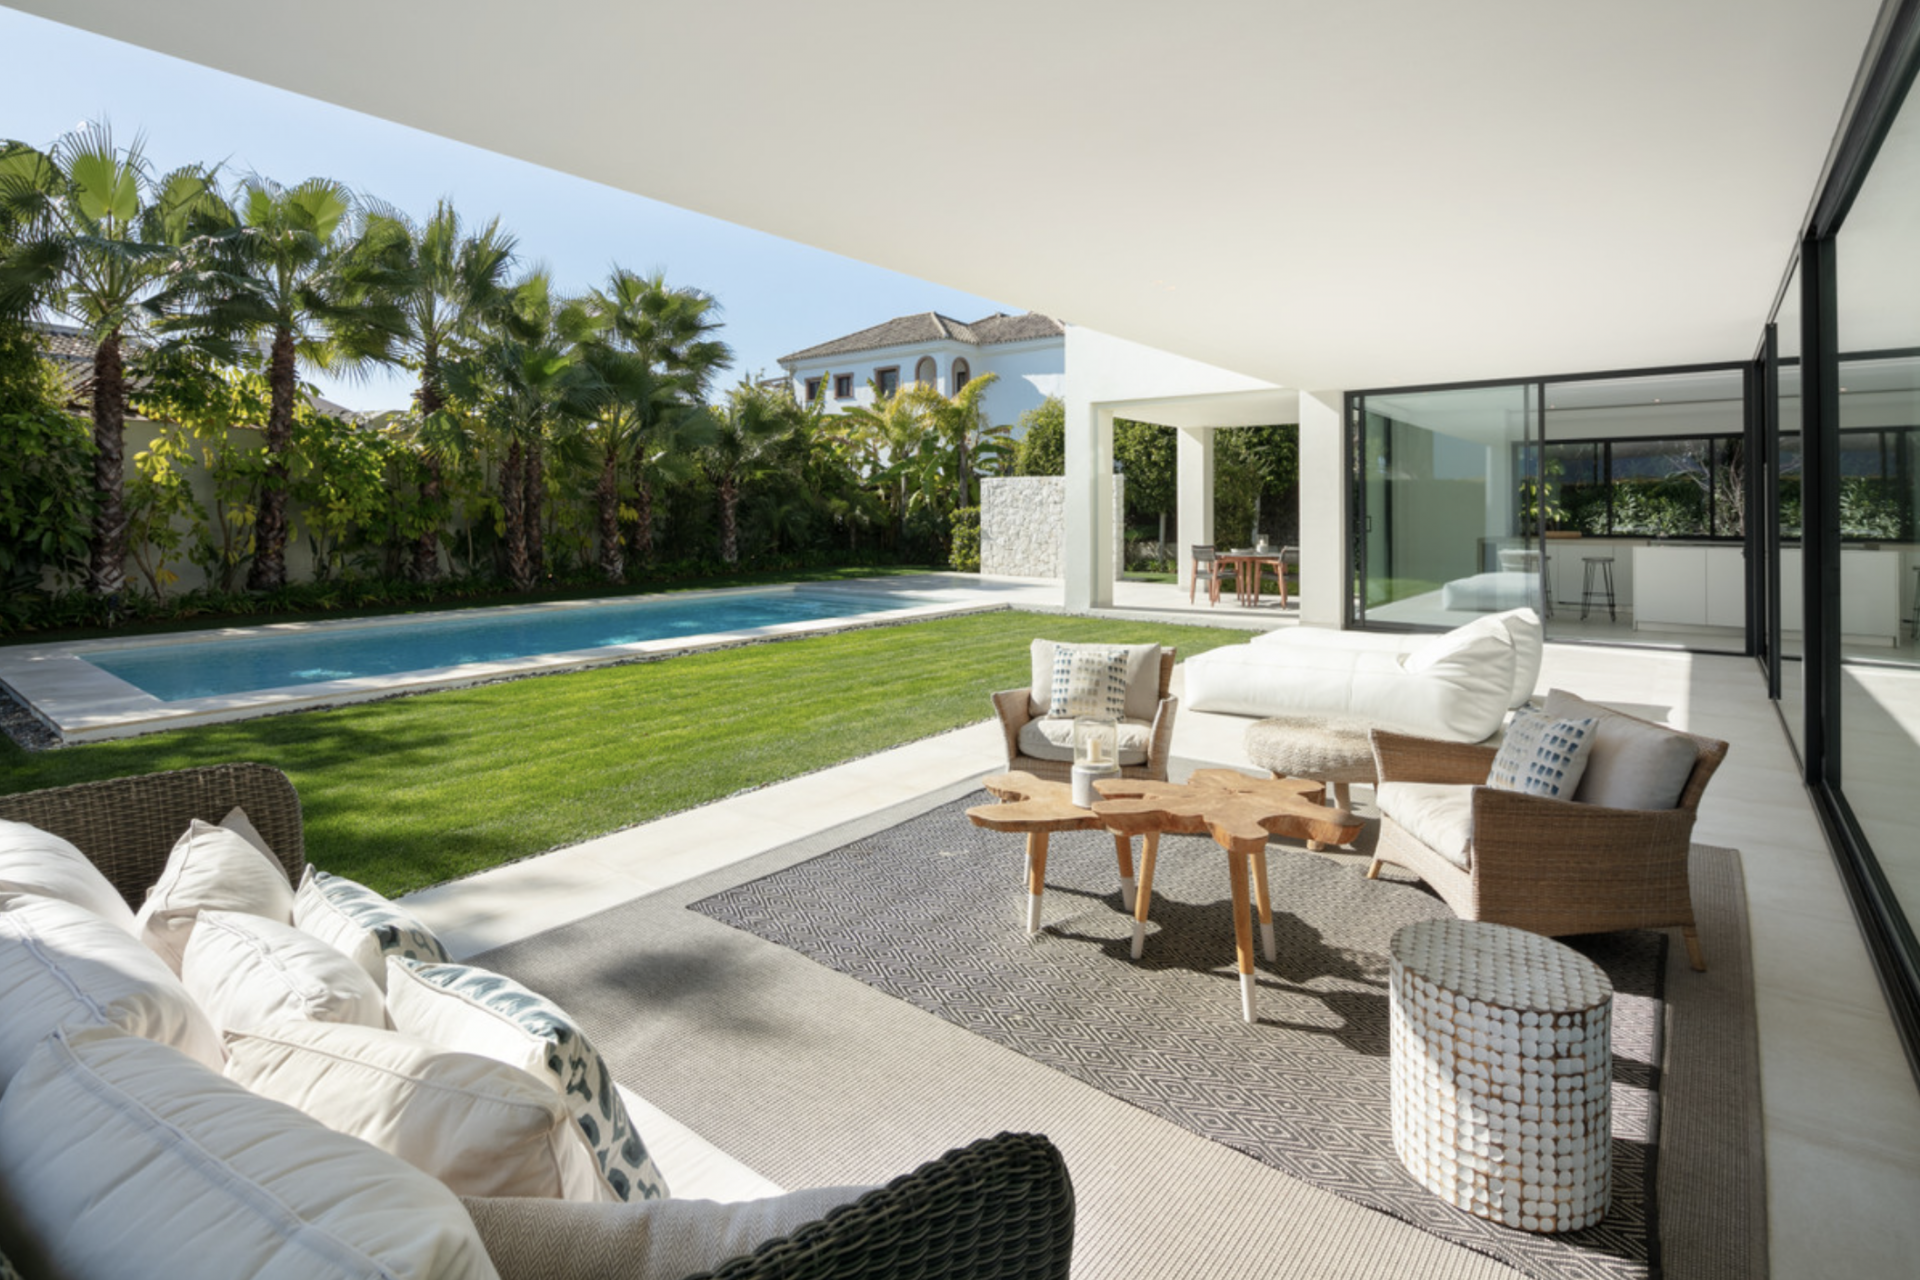 Immaculate beachside villa in a very quiet and private street of Casasola - Guadalmina Baja.